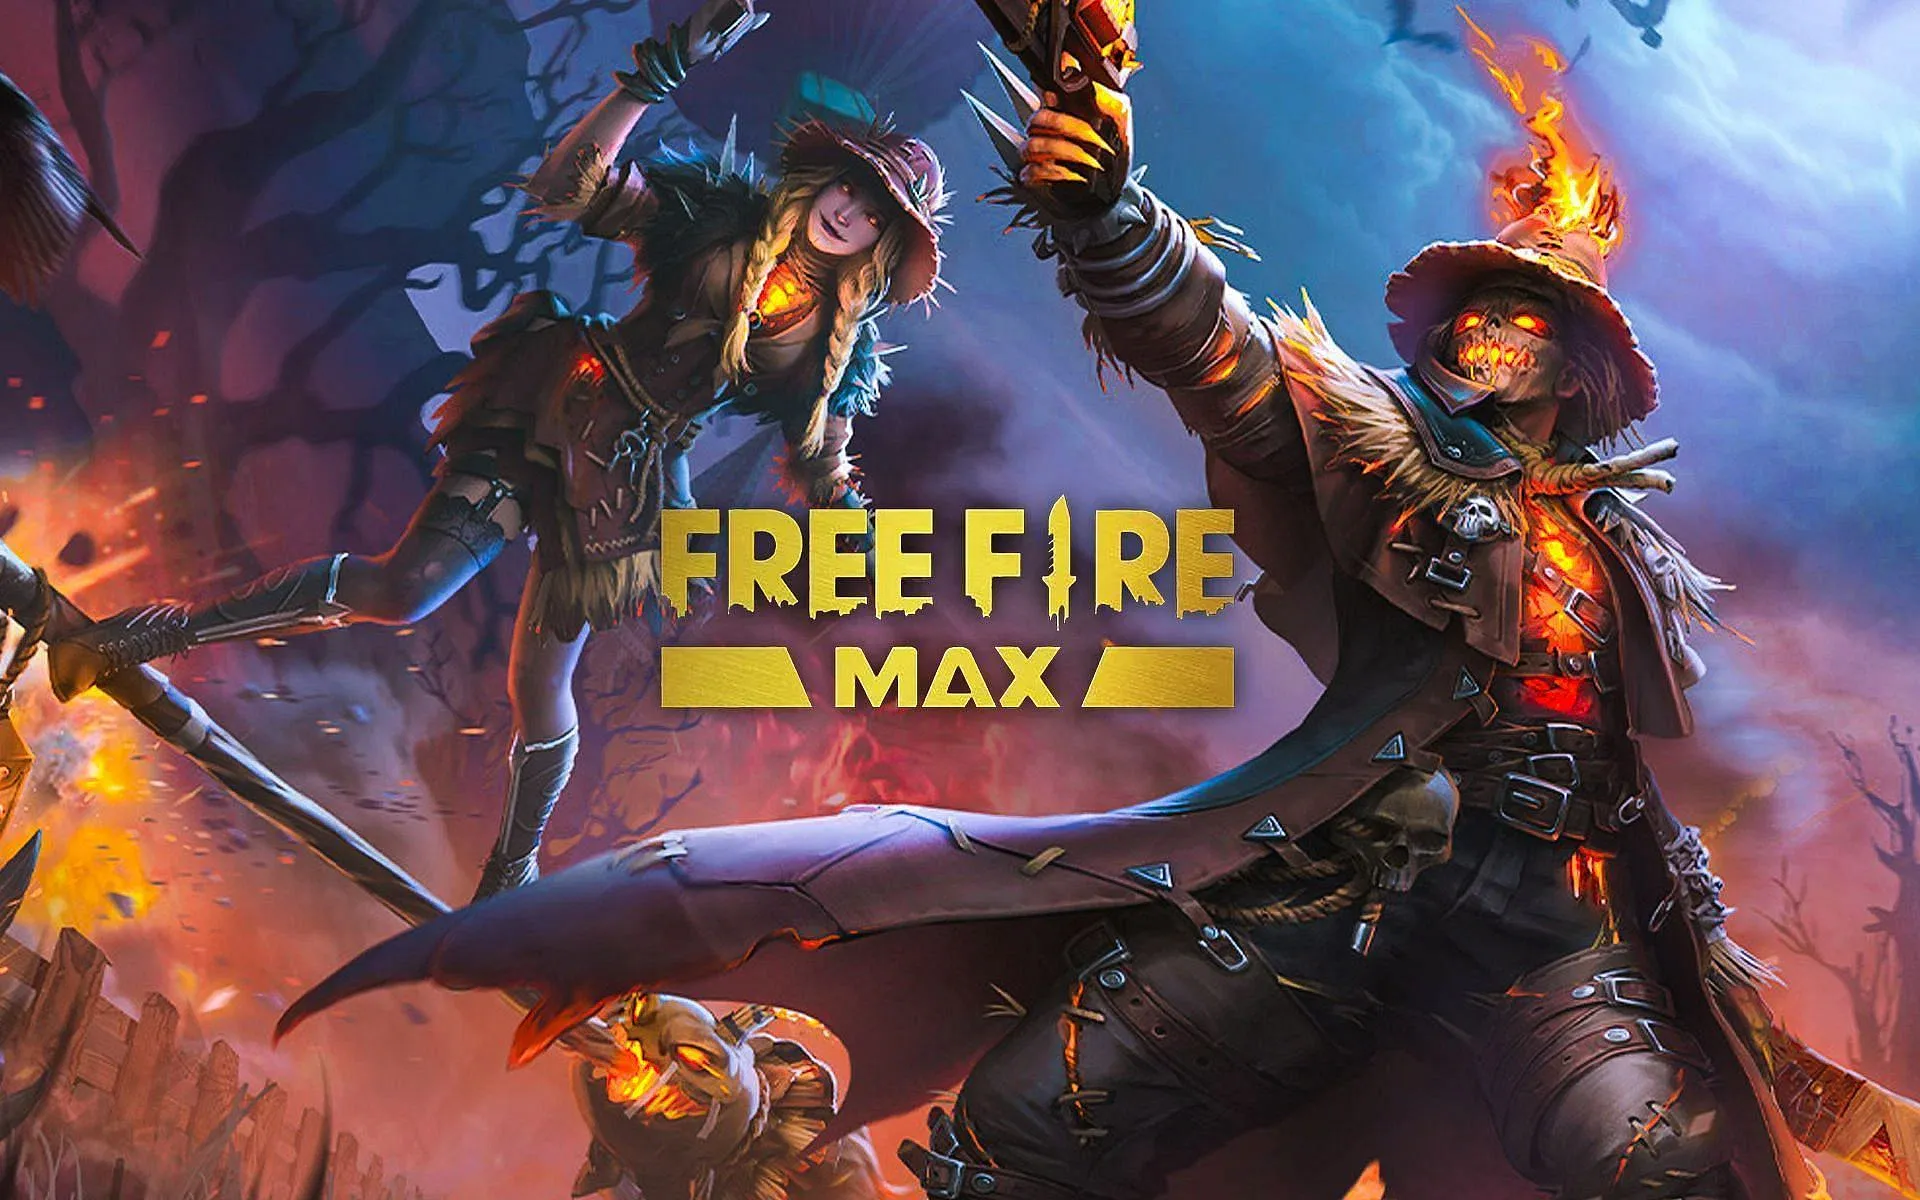 cover photo for article on free fire max redeem code